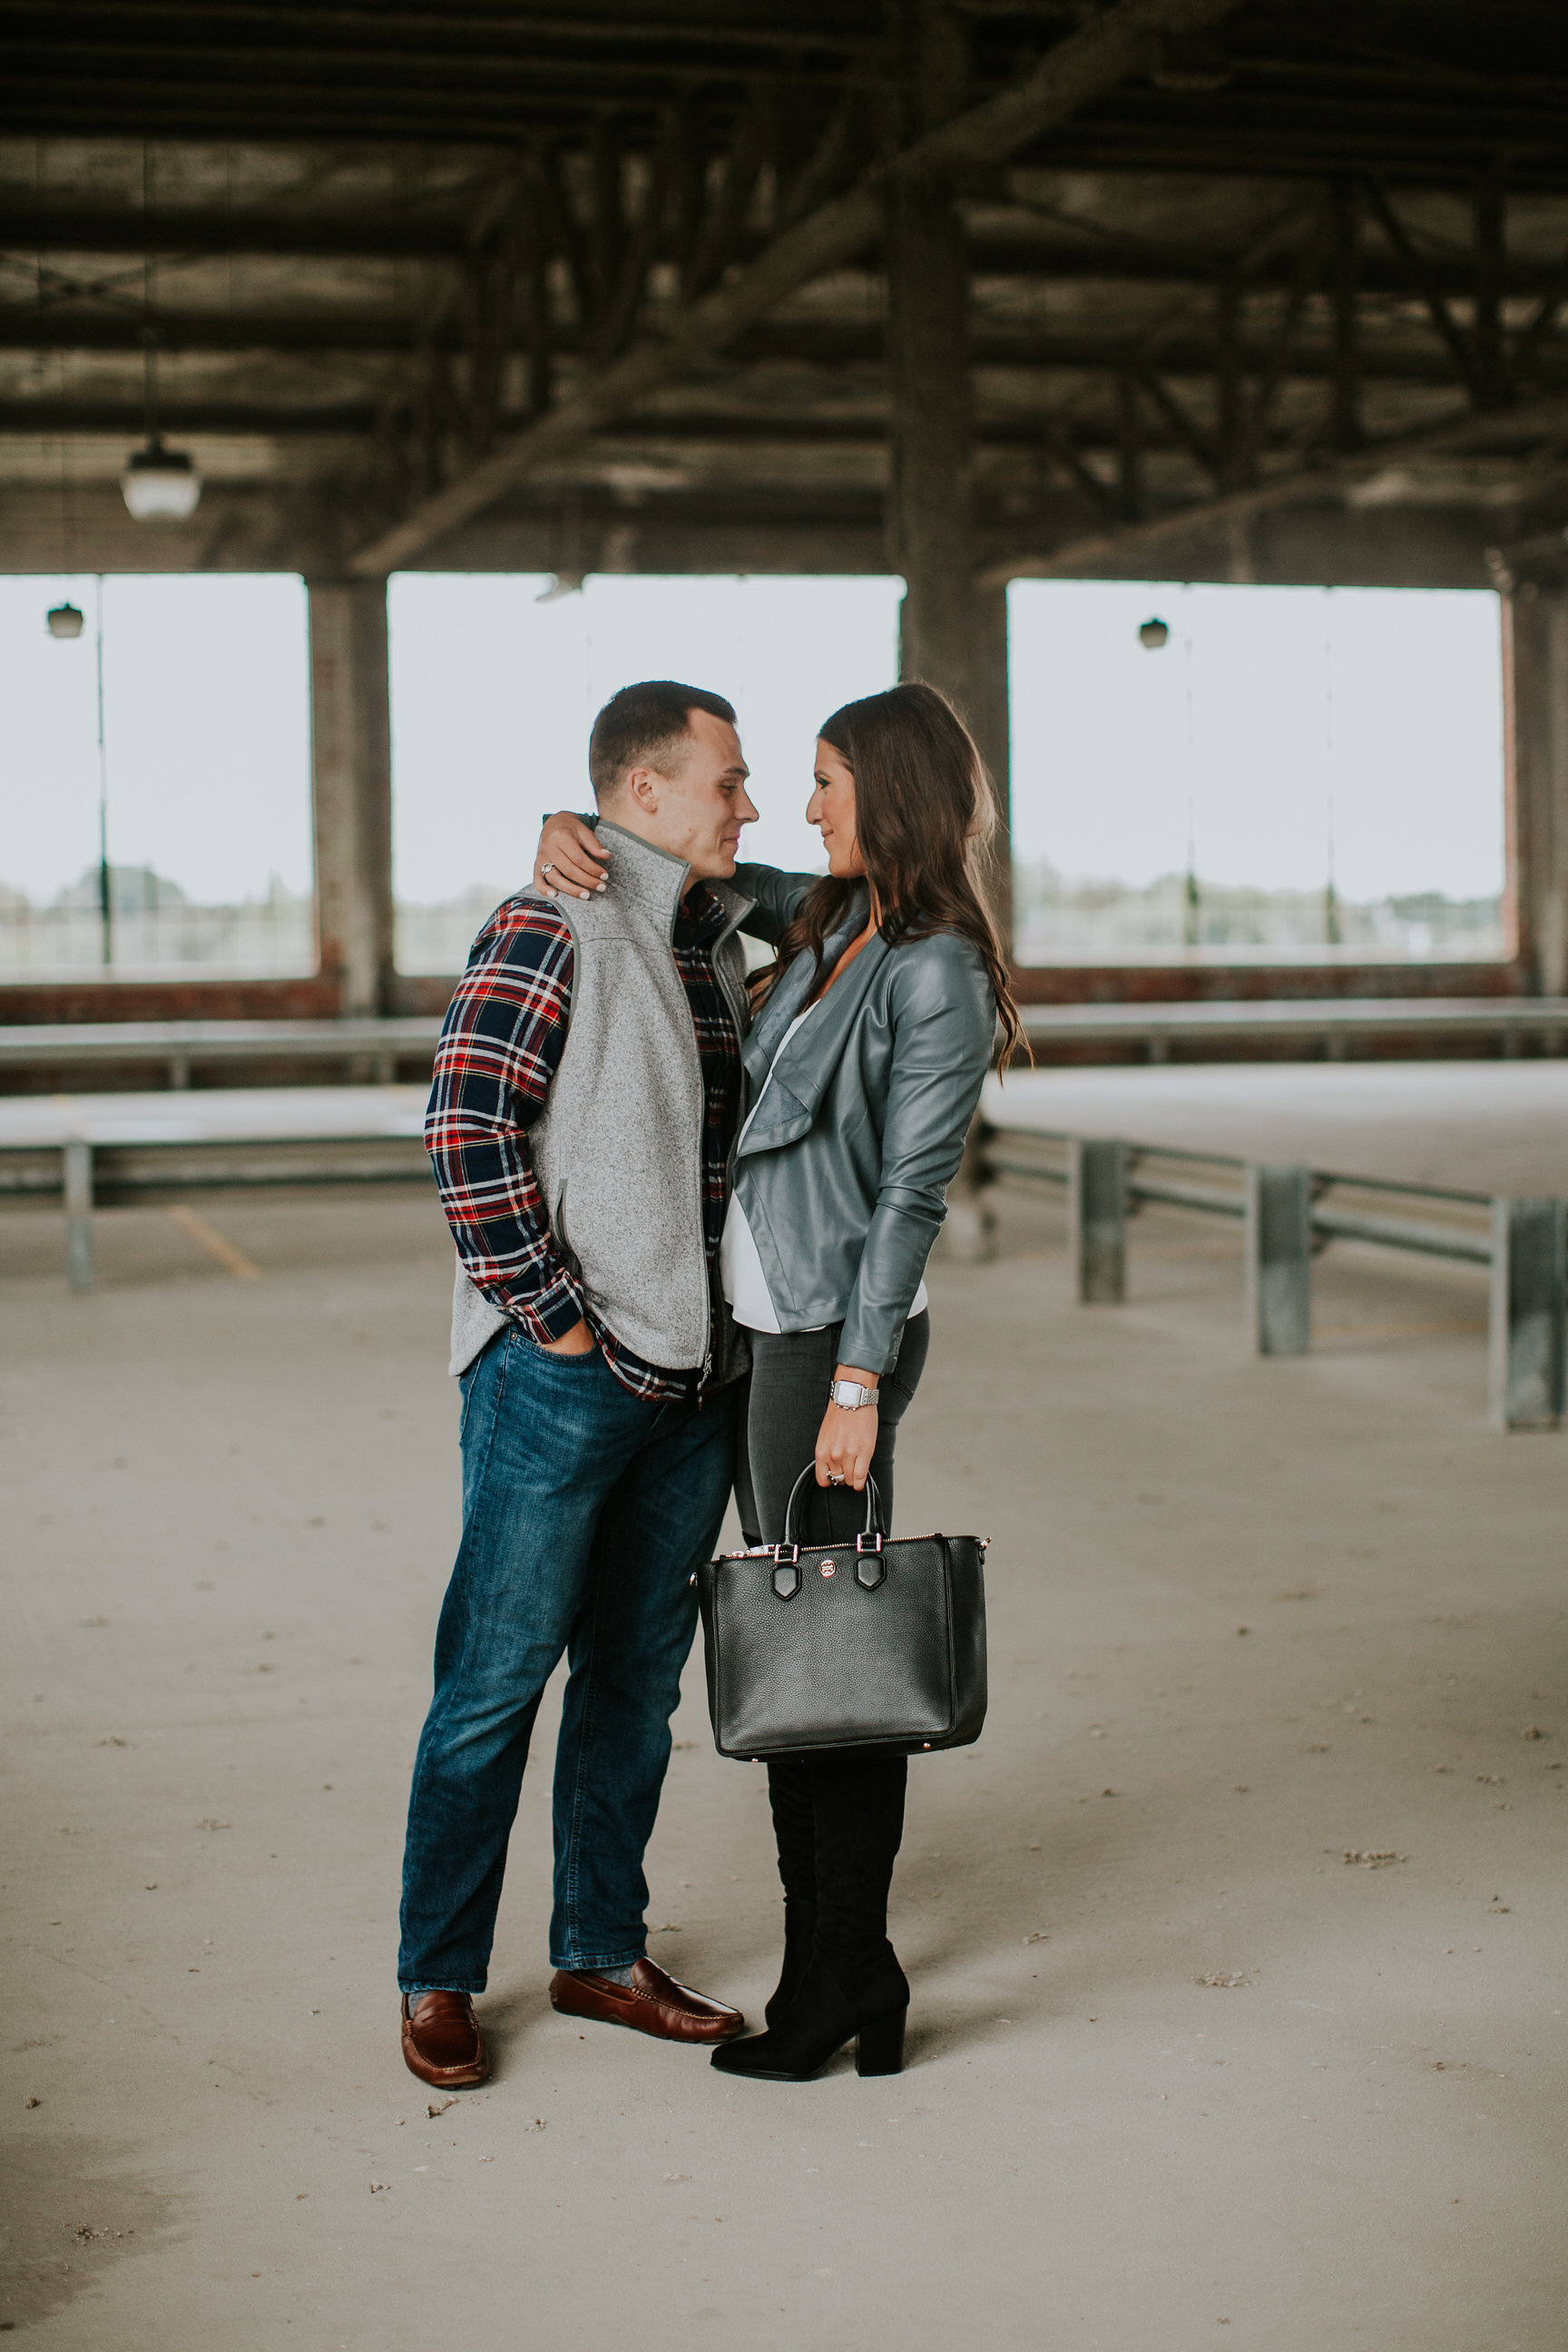 faux leather drape jacket, over the knee boots, winter style, winter fashion, couple style, couples goals, couples style, couples fashion, jordan white a southern drawl, grace wainwright fiance, men slim plaid shirt, holiday style, holiday fashion, holiday couples style // grace wainwright a southern drawl